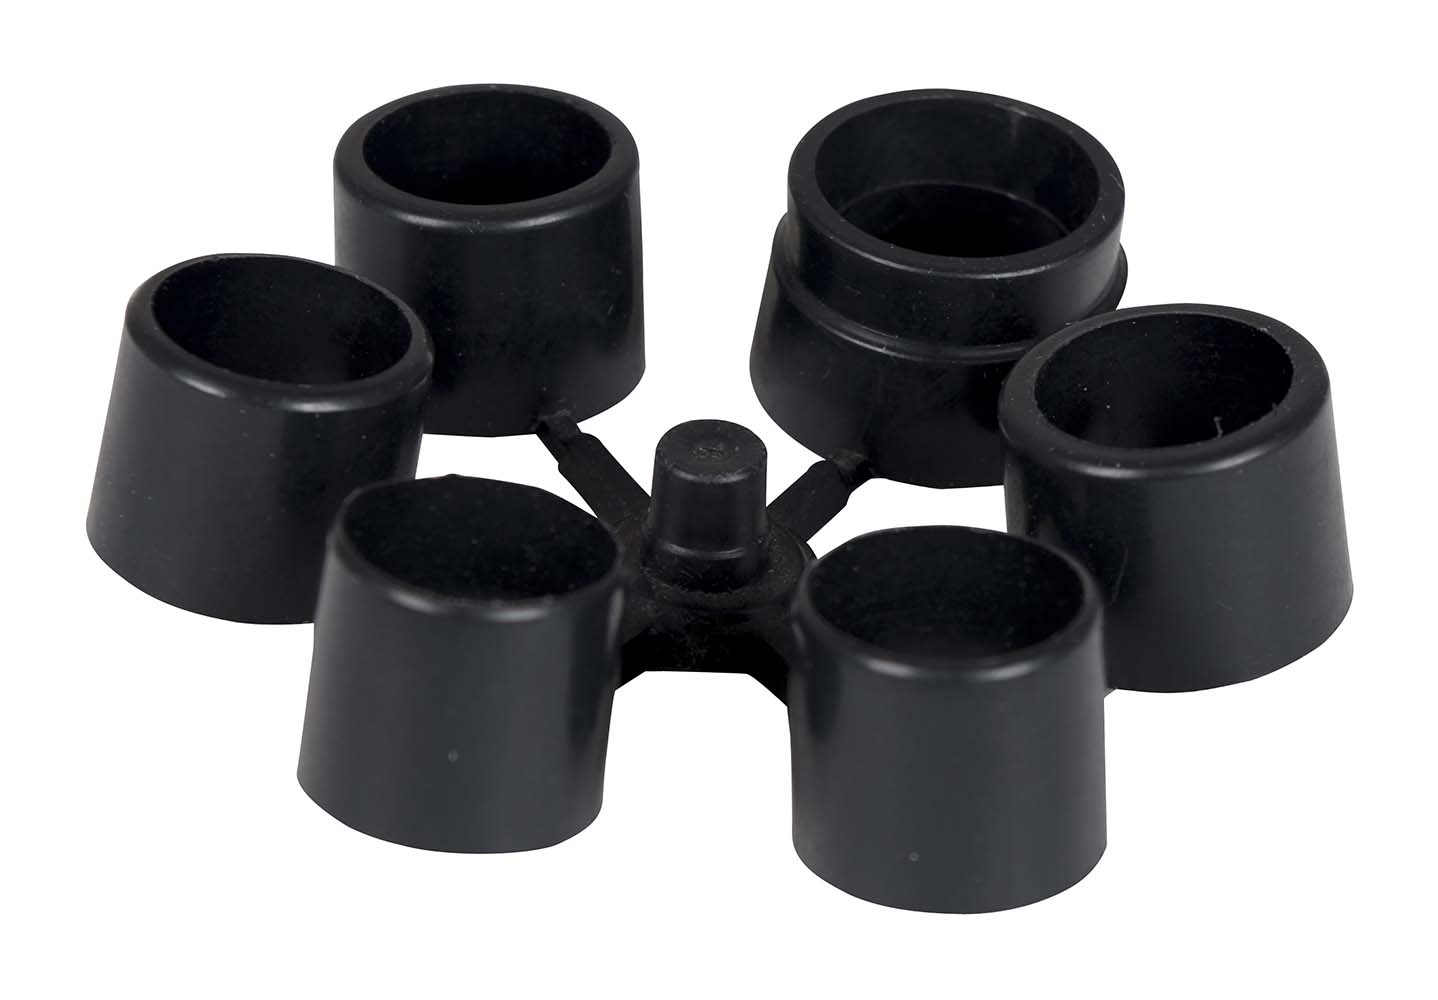 3807080 A set of 5 loose reducers. To connect a pump correctly to the desired article.